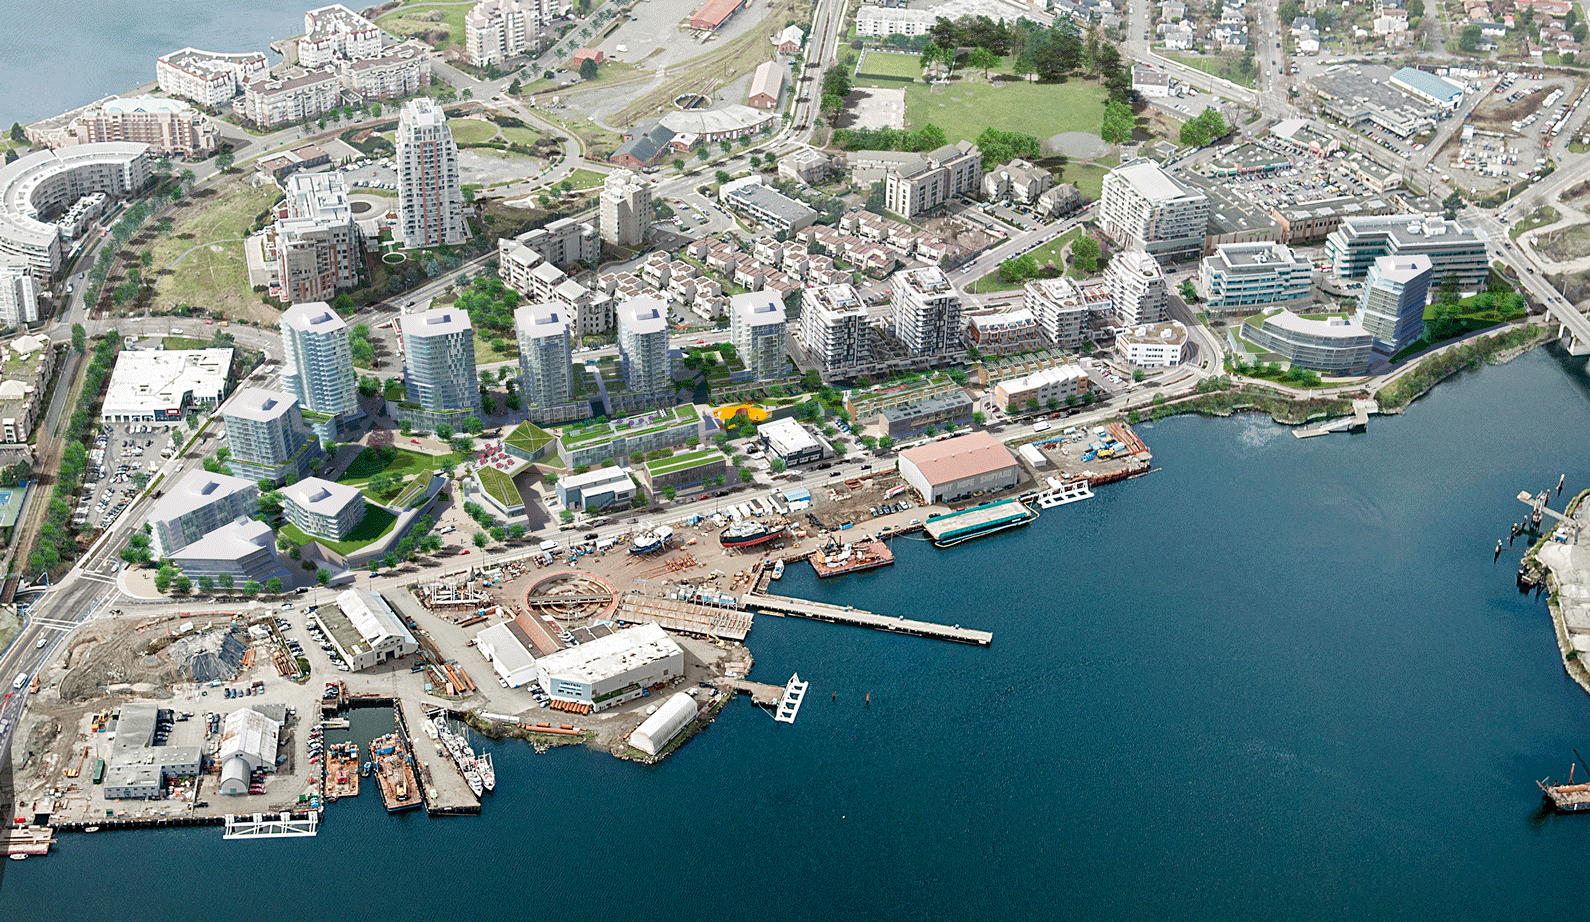 Birds-eye-view of docks and buildings along the ocean